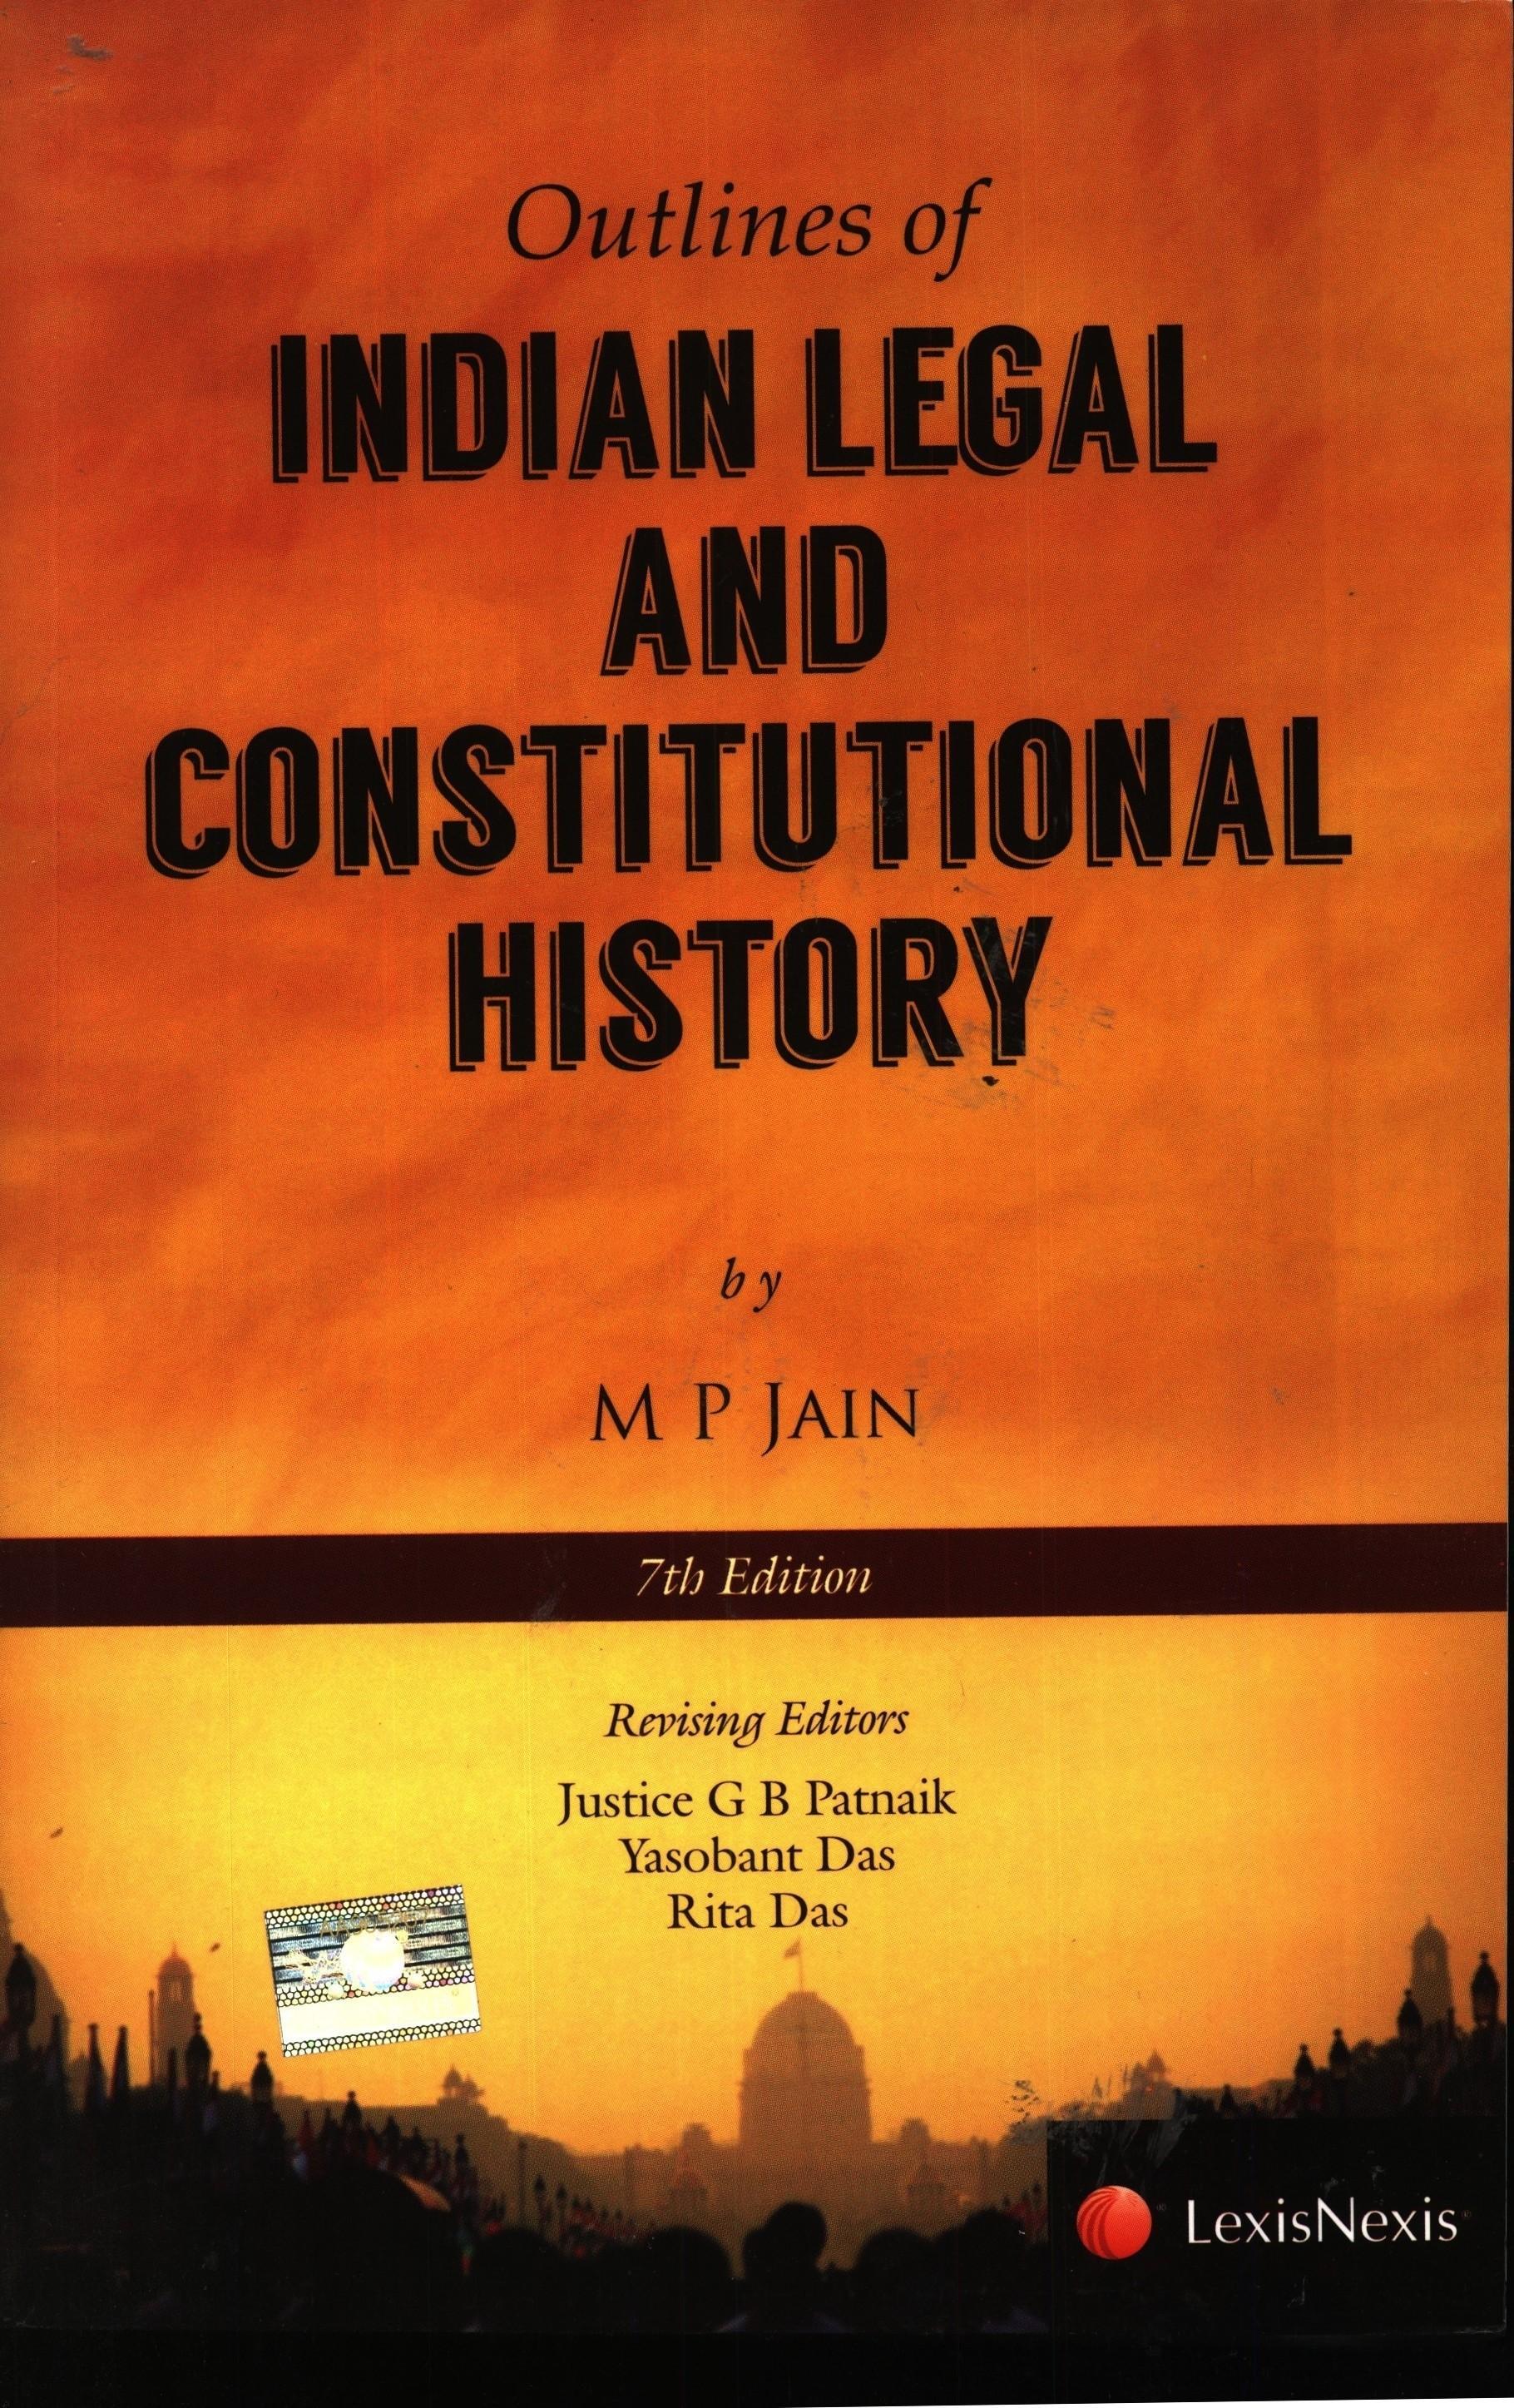 M P Jains Outlines of Indian Legal and Consituional History